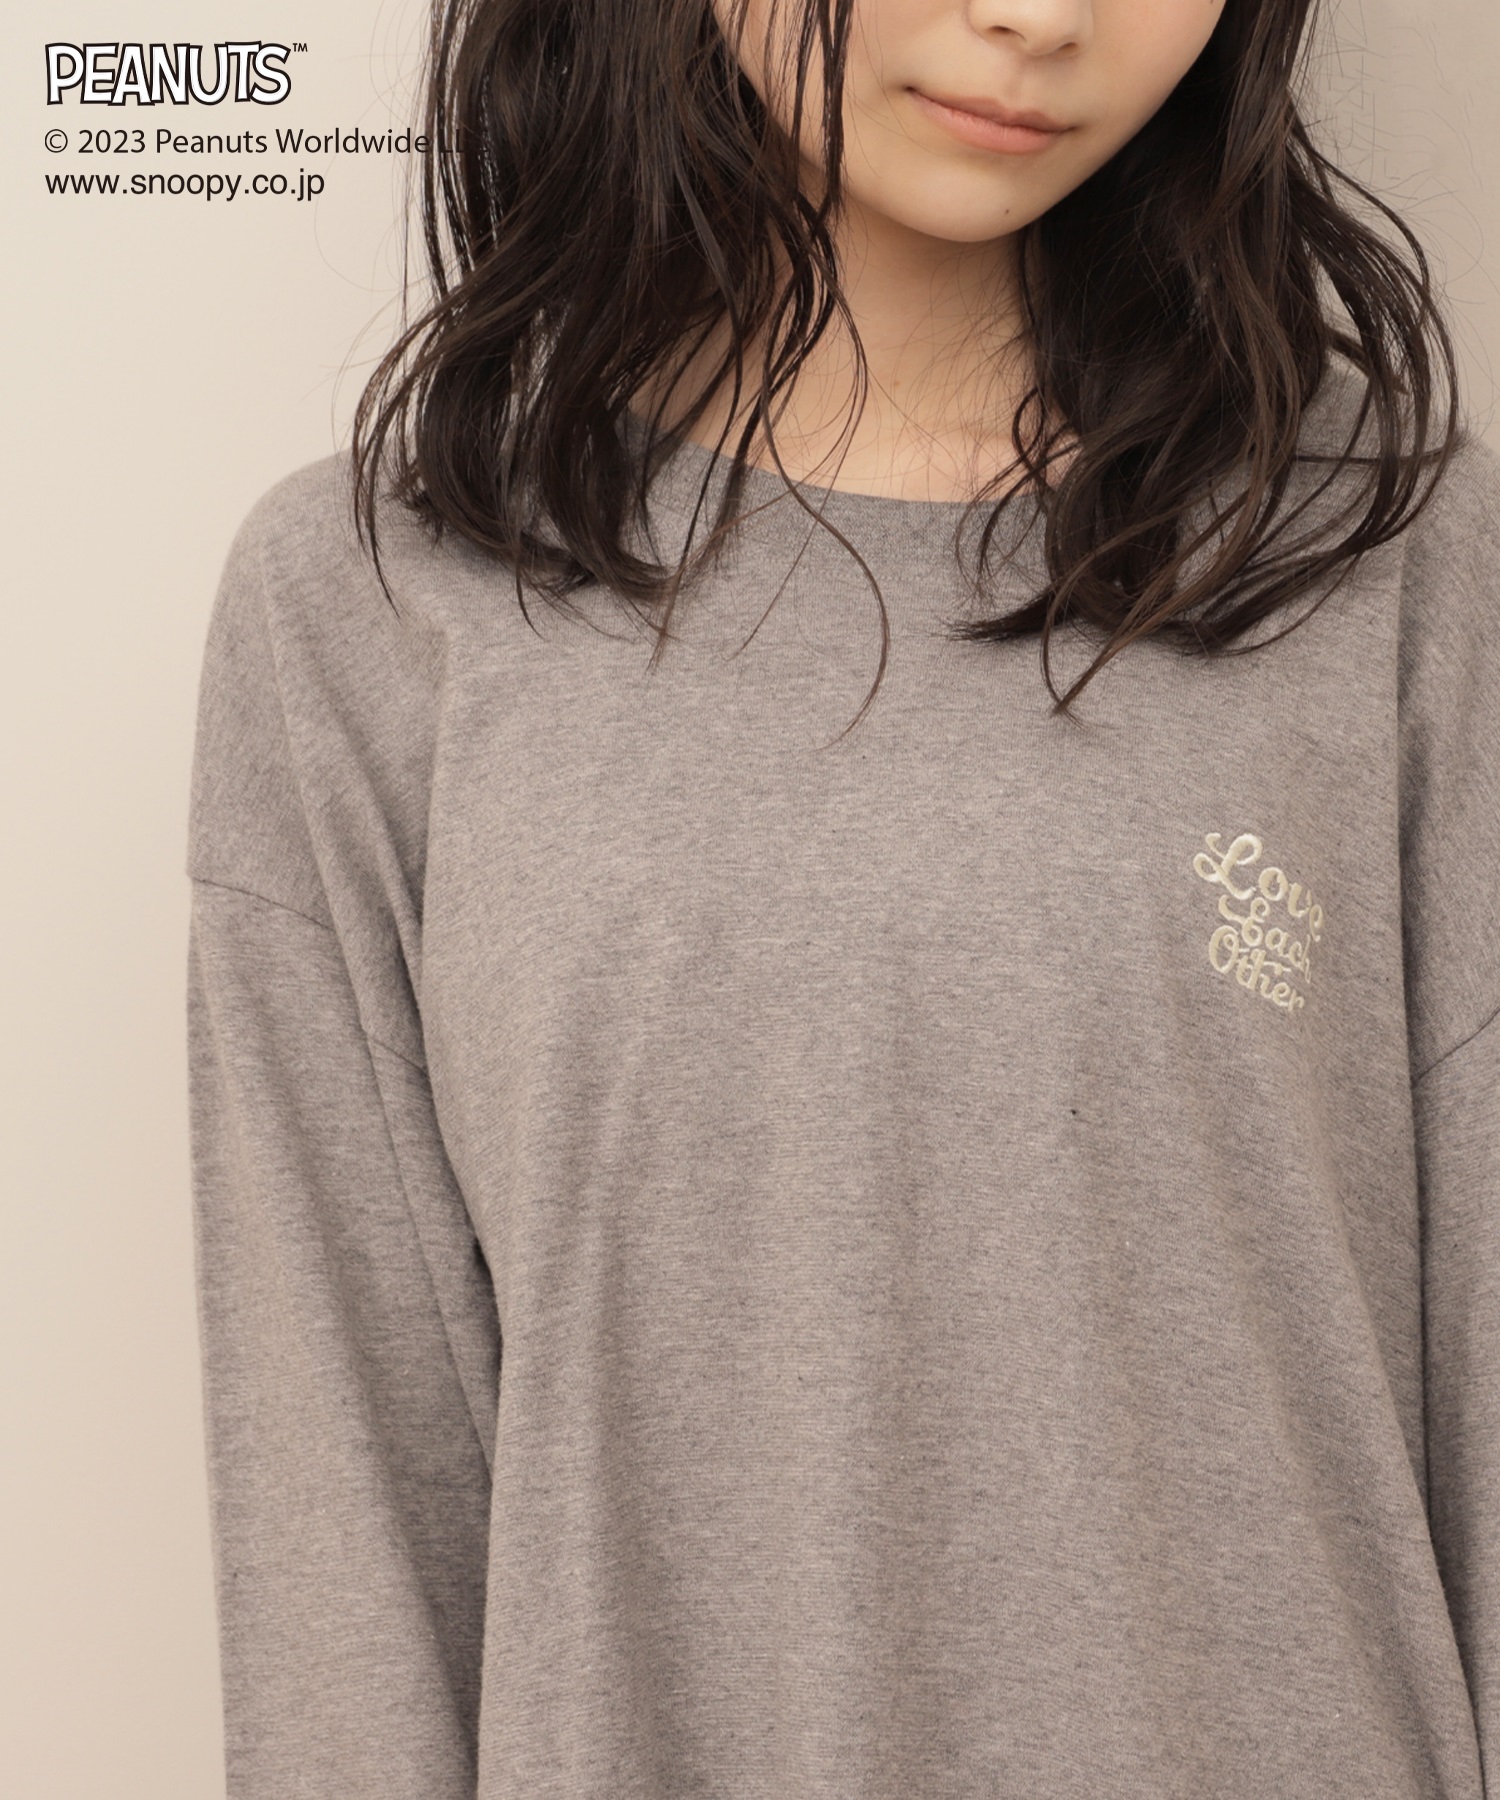 【SNOOPY】スヌーピー Love Each Other バックプリントロングTシャツ(11グレー-Ｍ-0581039-11-031)